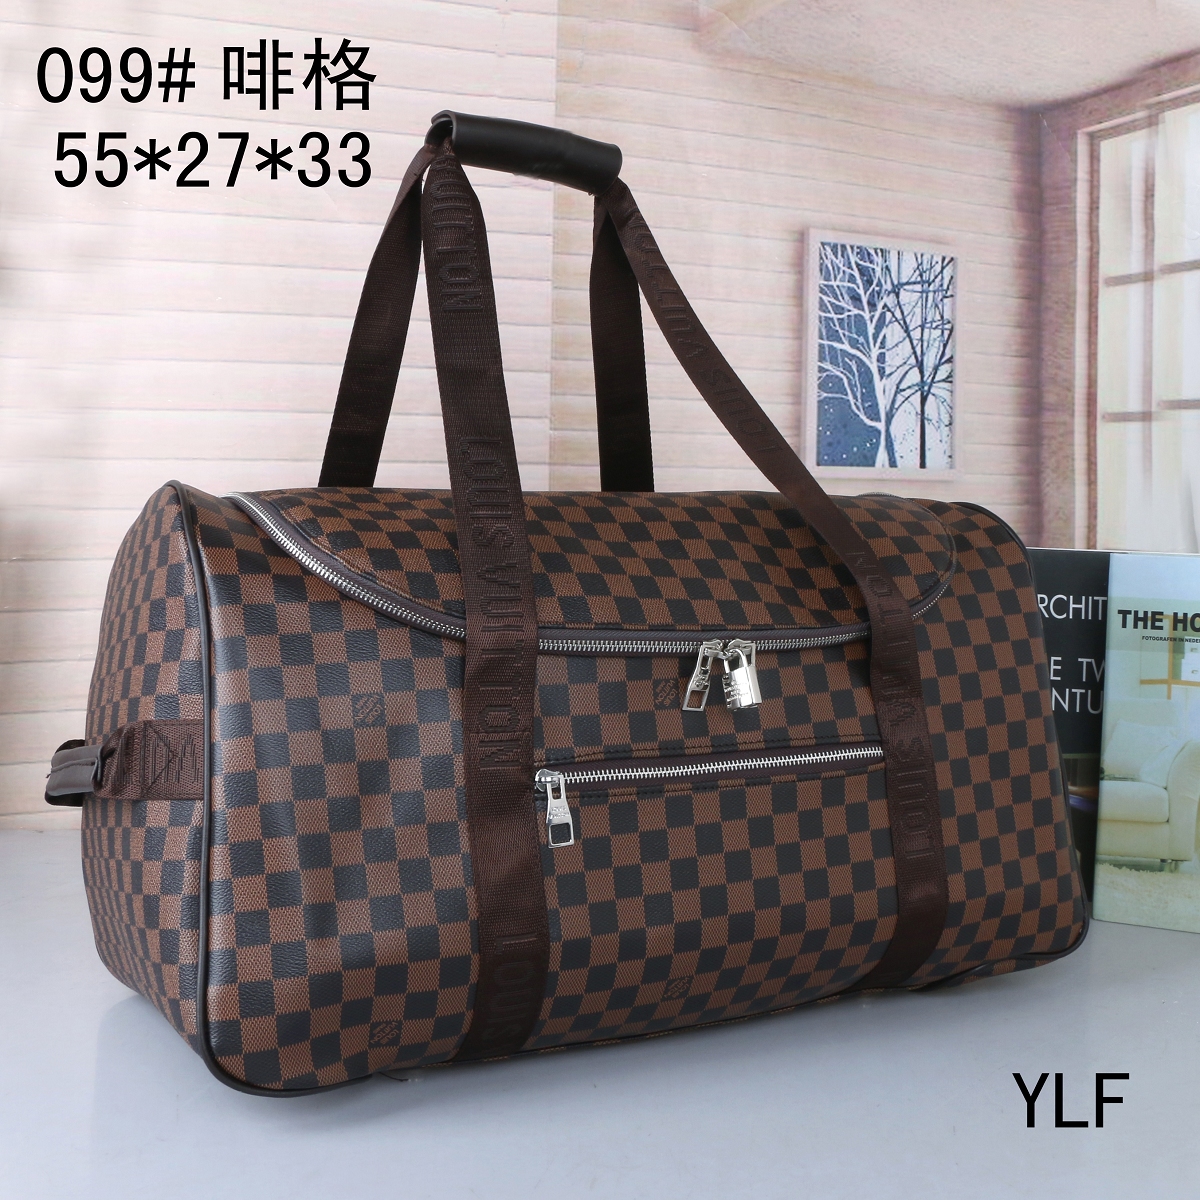 

2019 Hot Sell New brand designer Unisex handbags Travel bags messenger bag Totes bags Duffel Bags Suitcases Luggages (17 colors for choose), #15